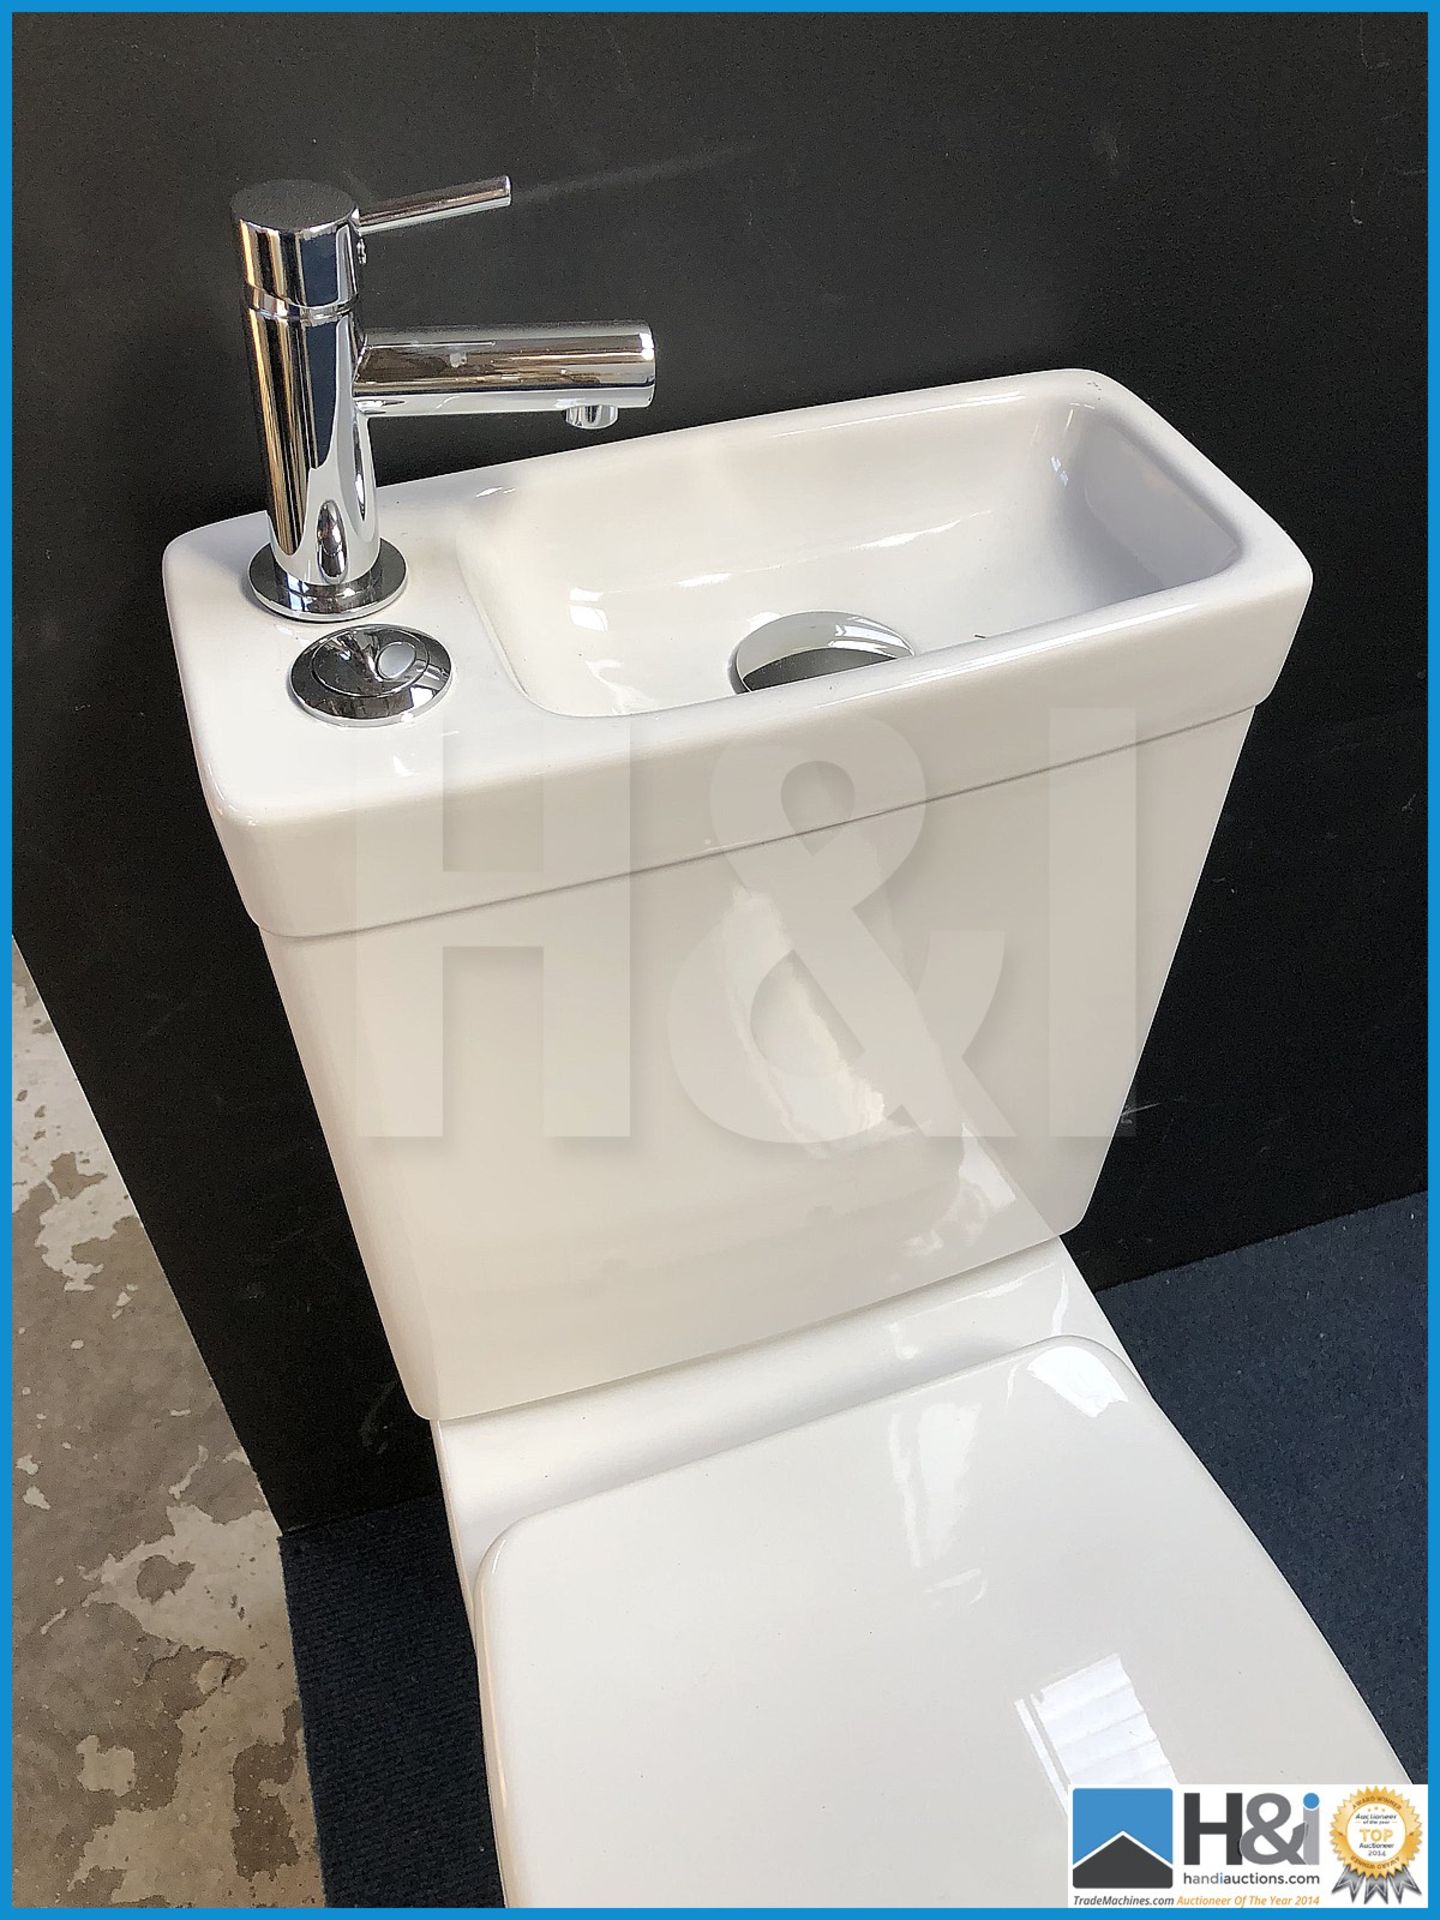 Cooke and Lewis cloakroom toilet complete with insert basin and modern monobloc mixer and click clac - Image 2 of 3